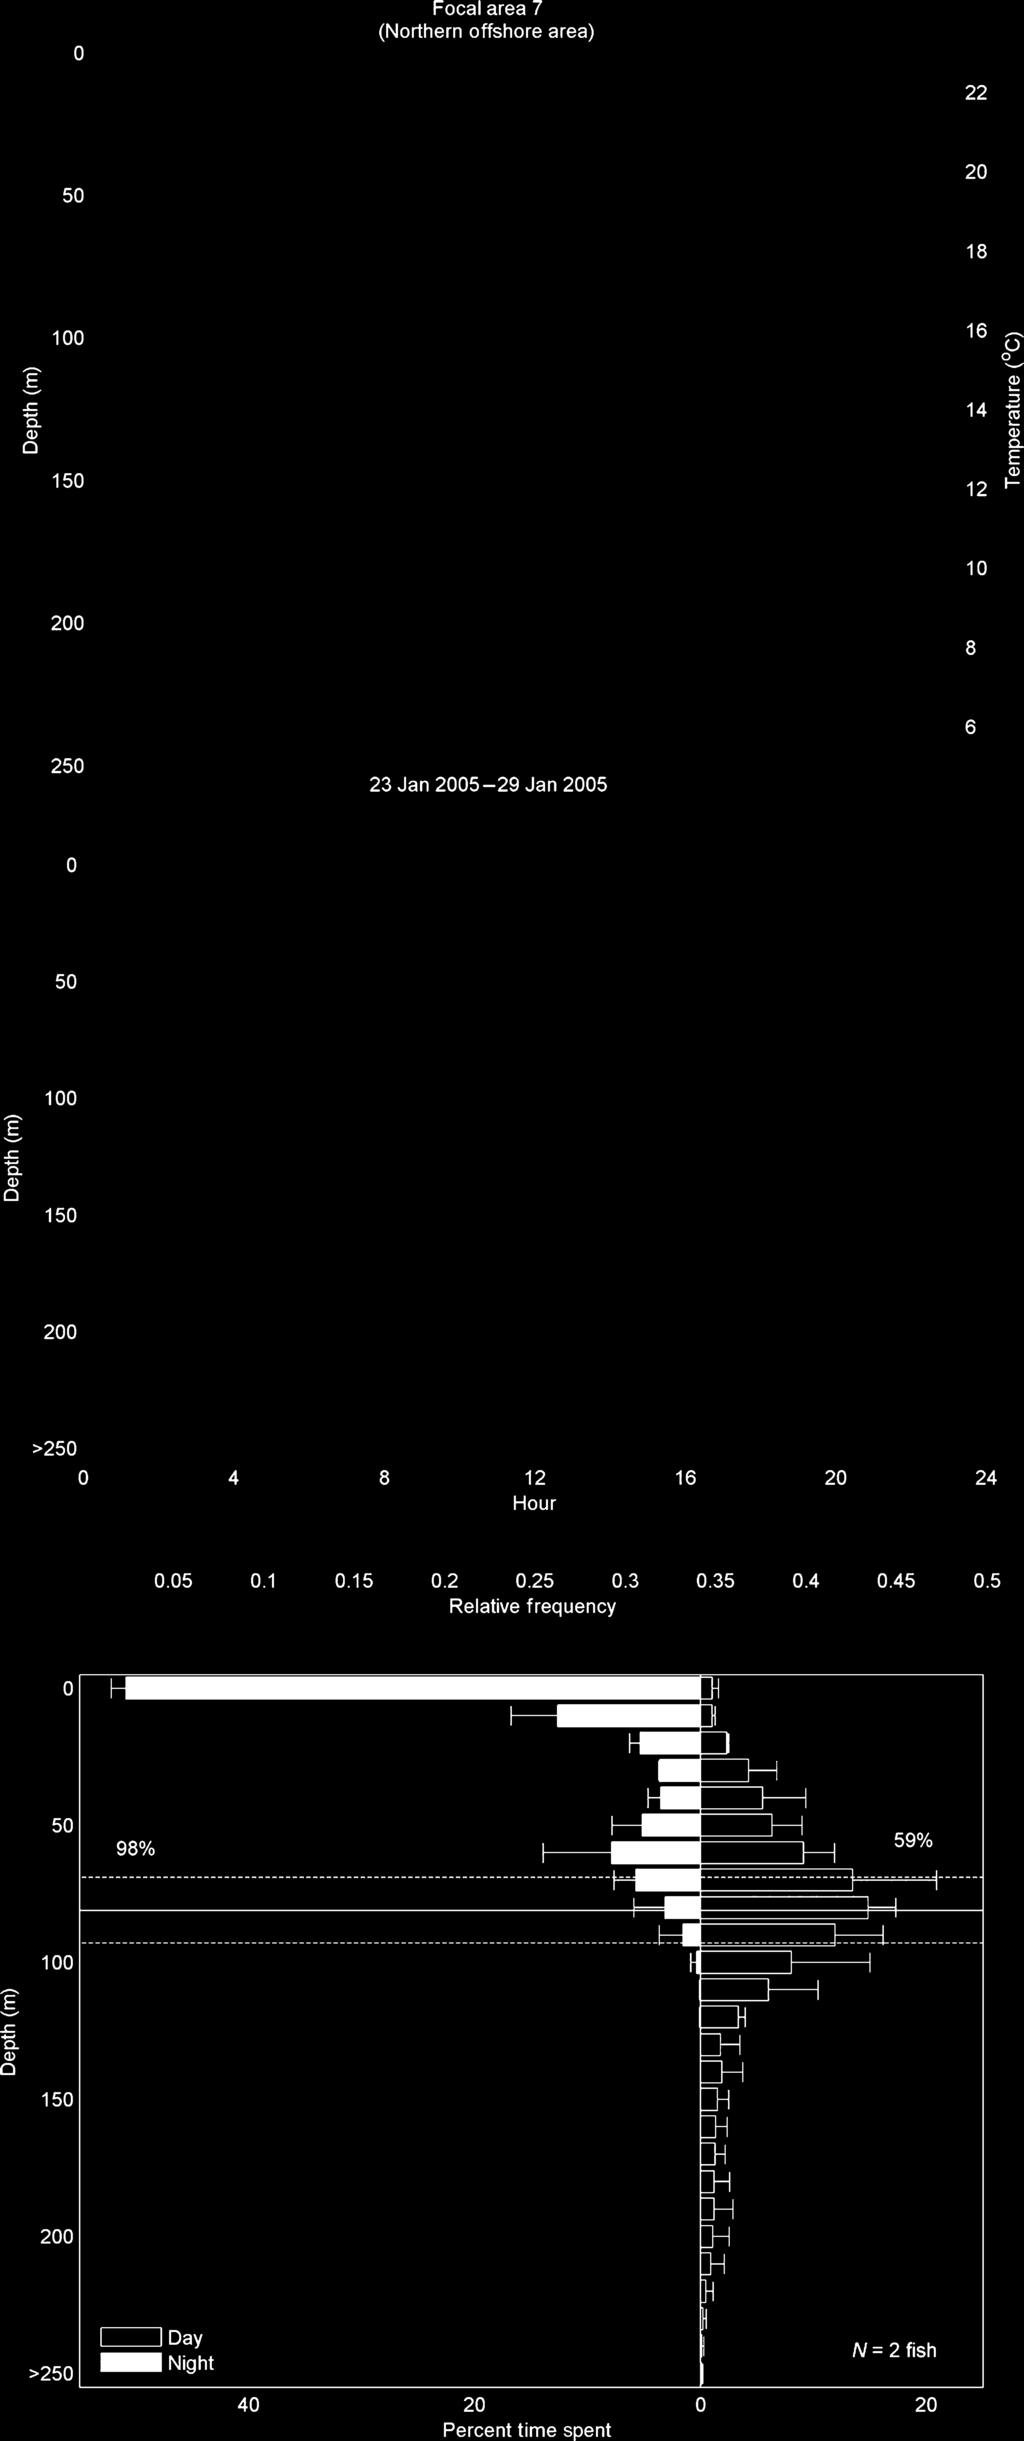 (c) Frequency histogram of percent time spent at depth for all observations.